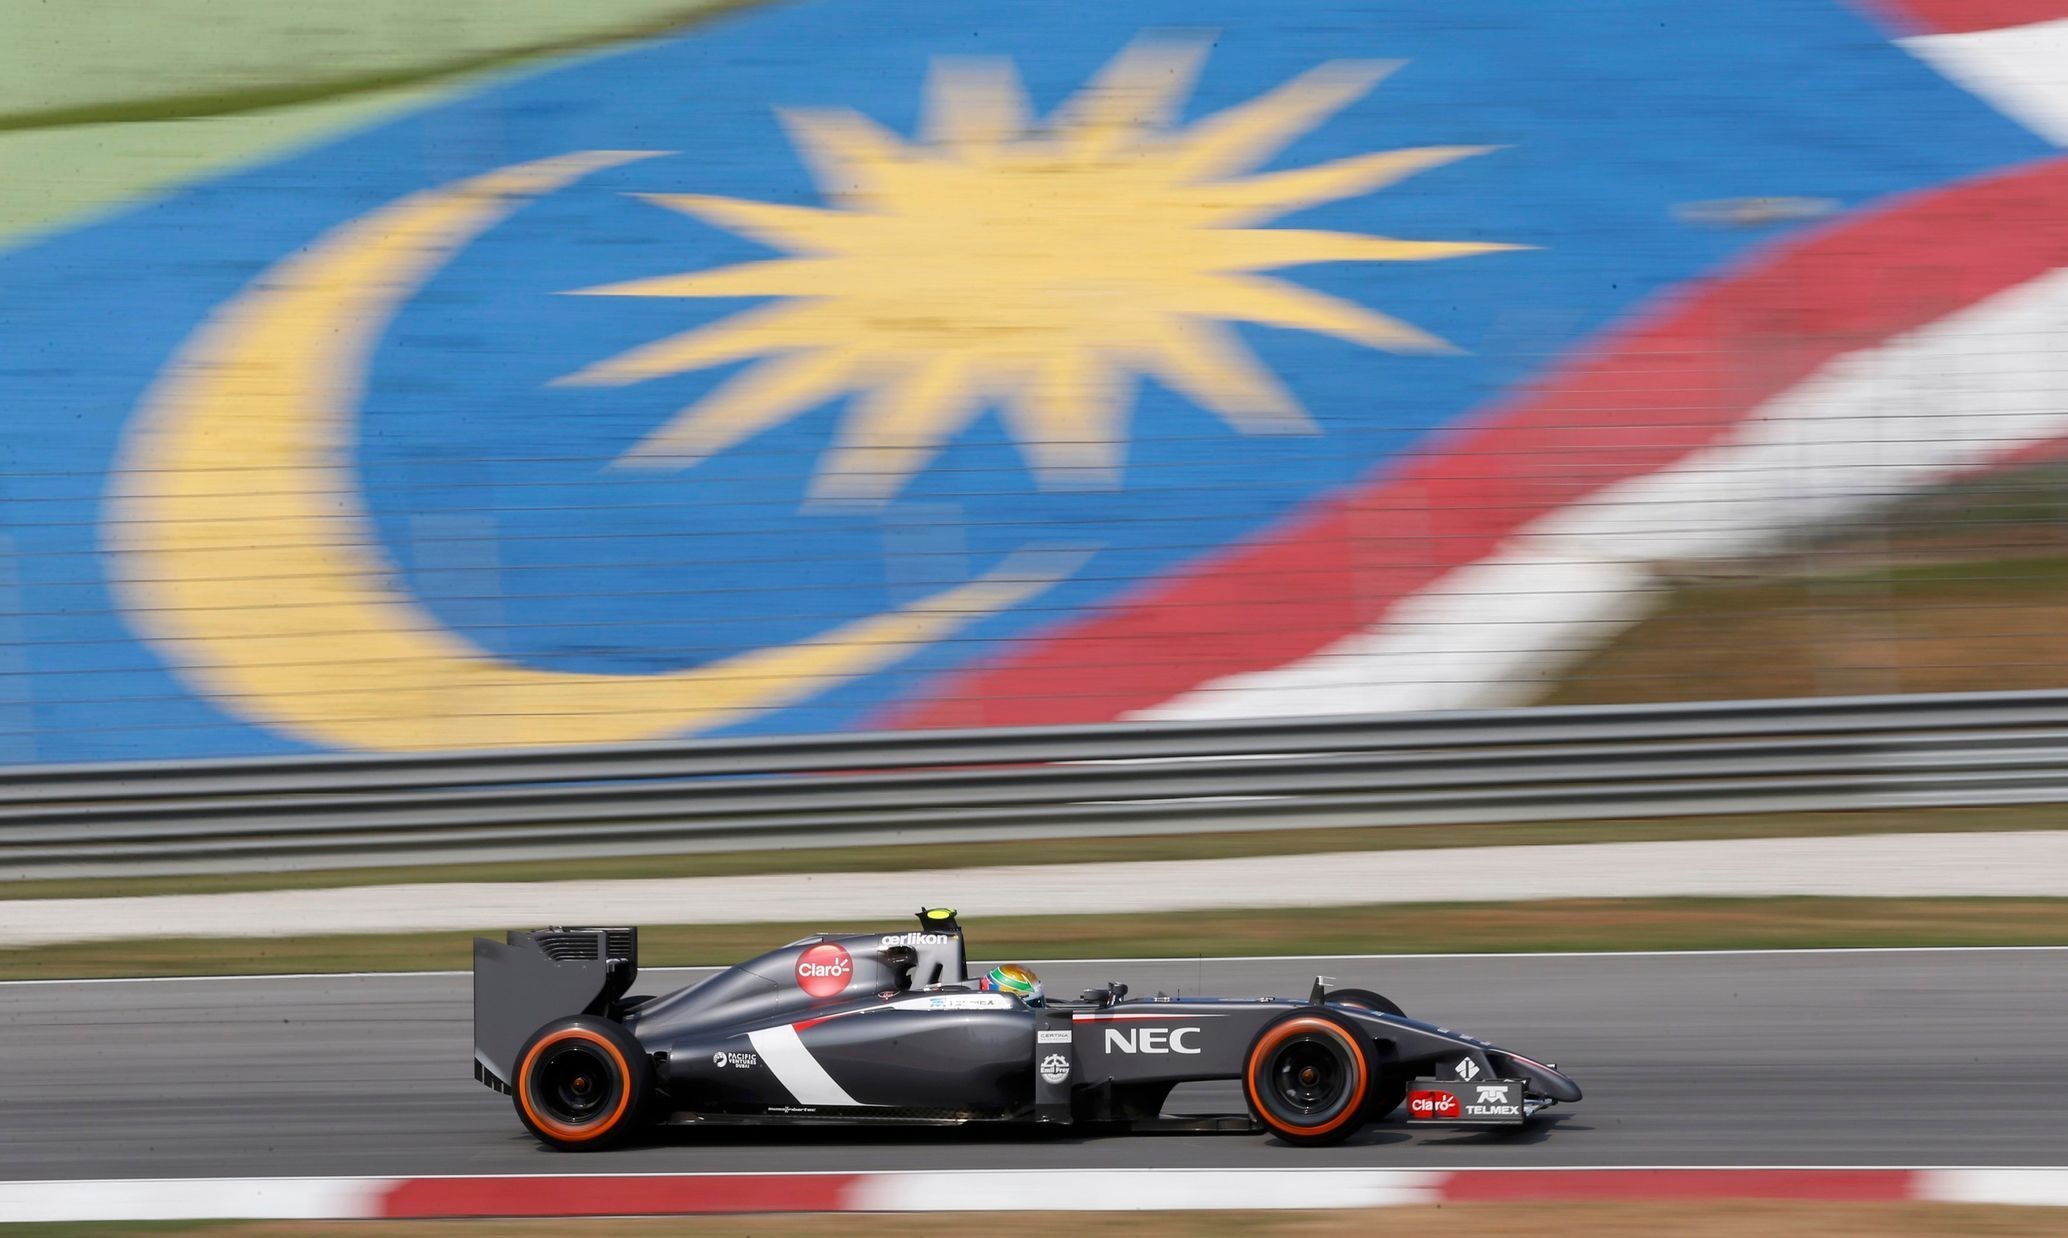 Sauber Formula One driver Gutierrez of Mexico drives during the first practice session of the Malaysian F1 Grand Prix at Sepang International Circuit outside Kuala Lumpur